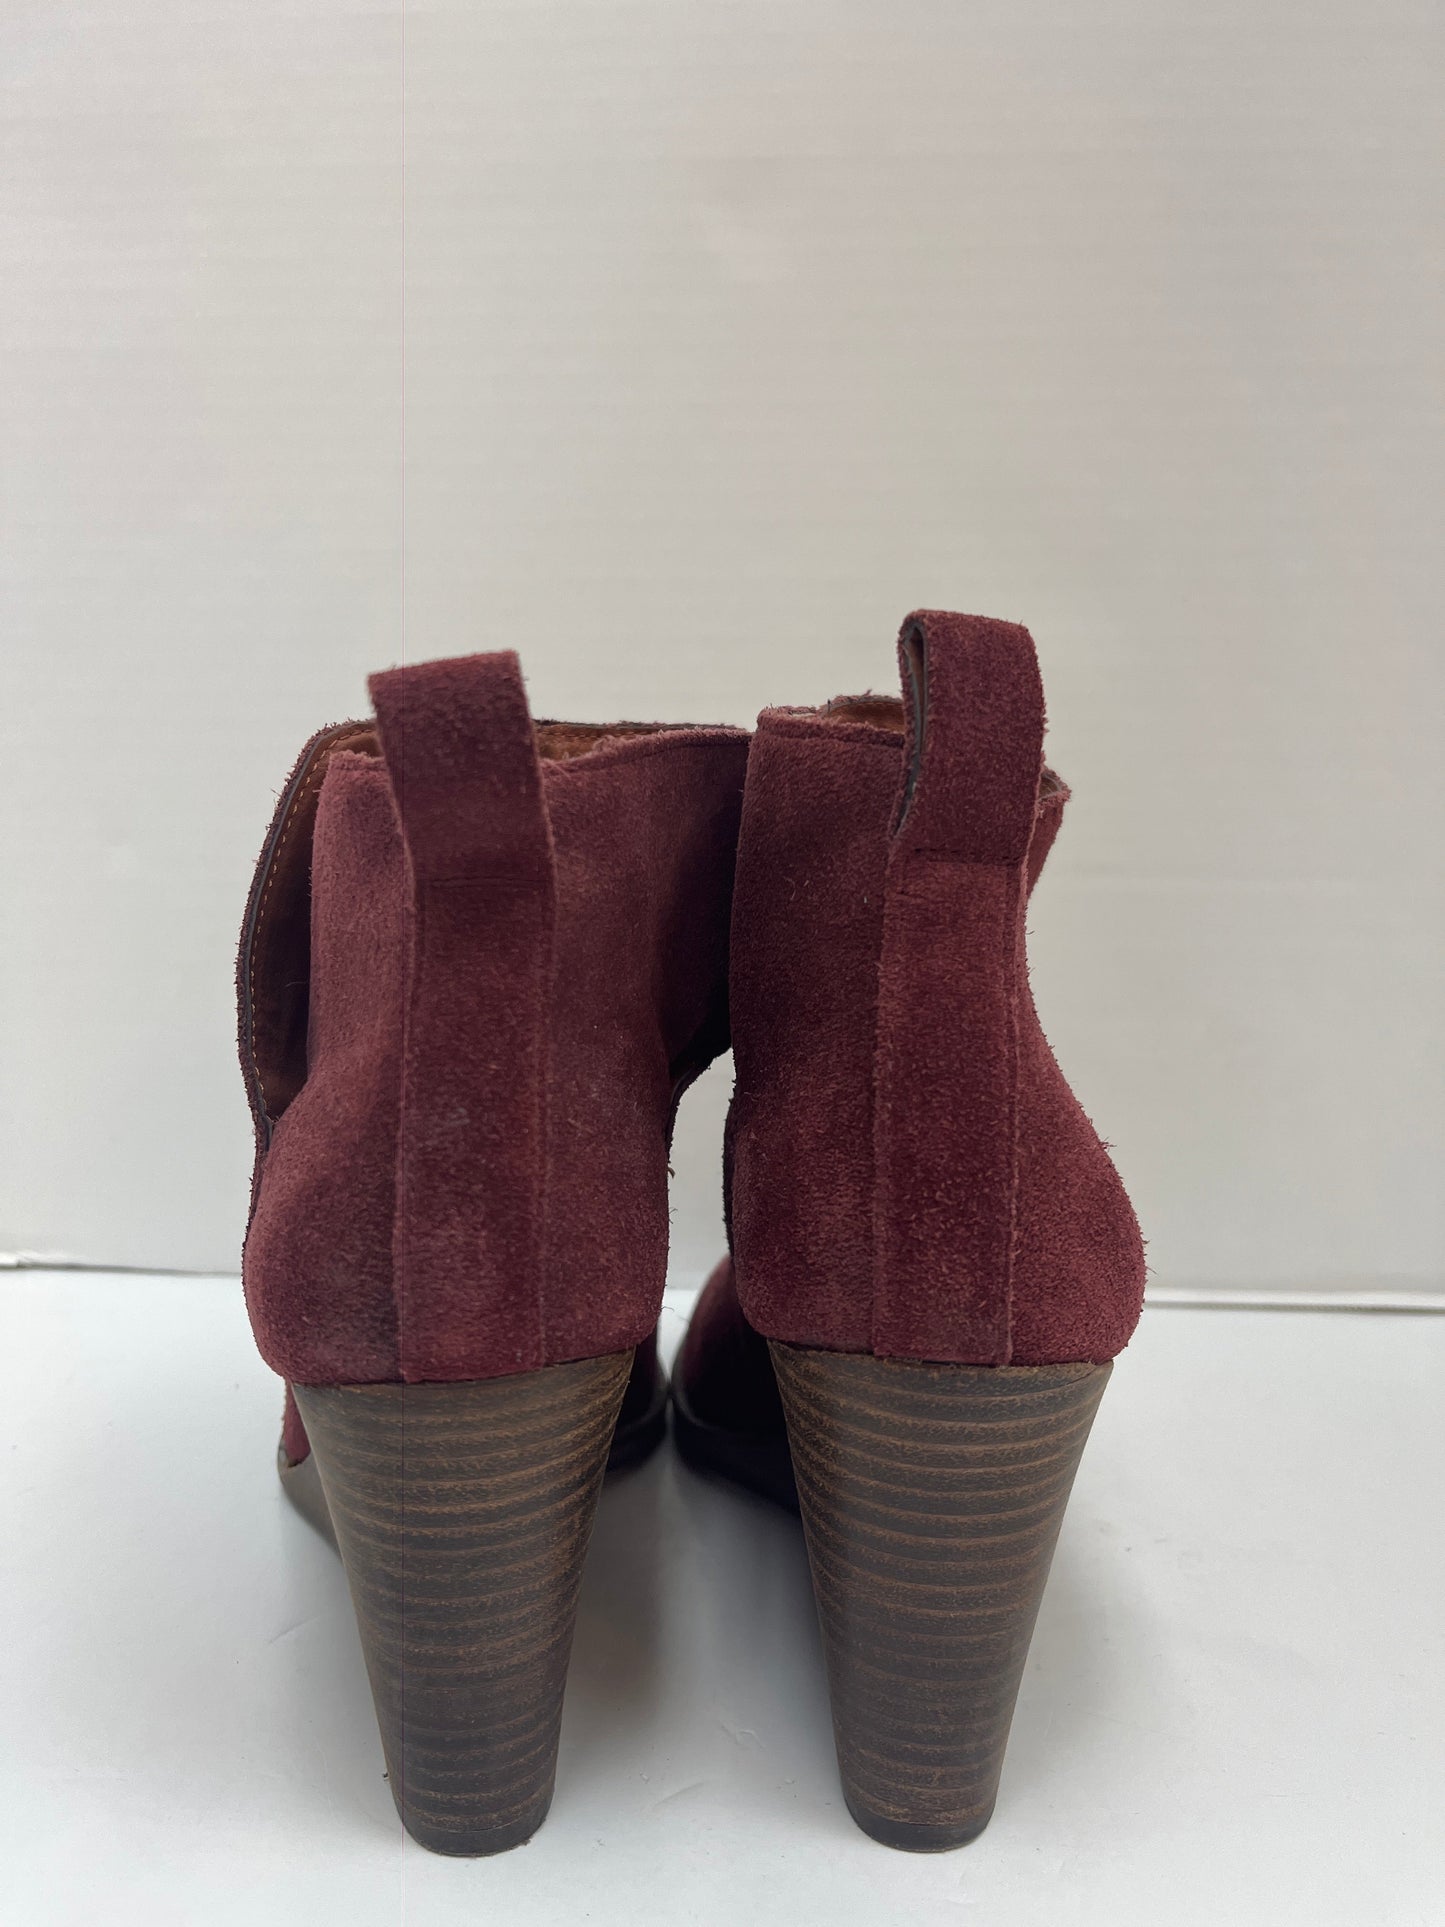 Boots Ankle By Lucky Brand  Size: 8.5